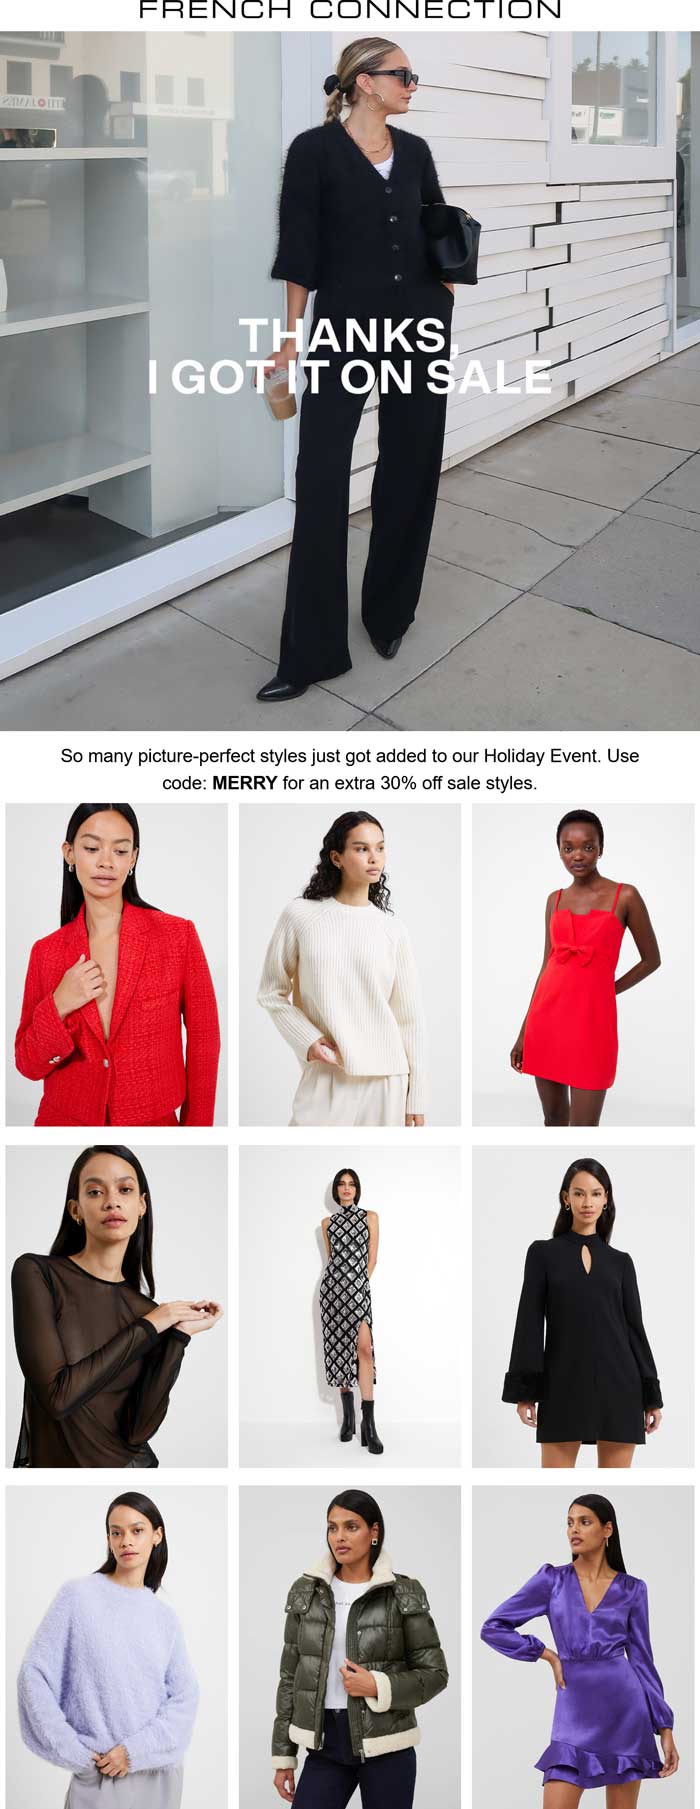 Extra 30% off sale styles at French Connection via promo code MERRY #frenchconnection